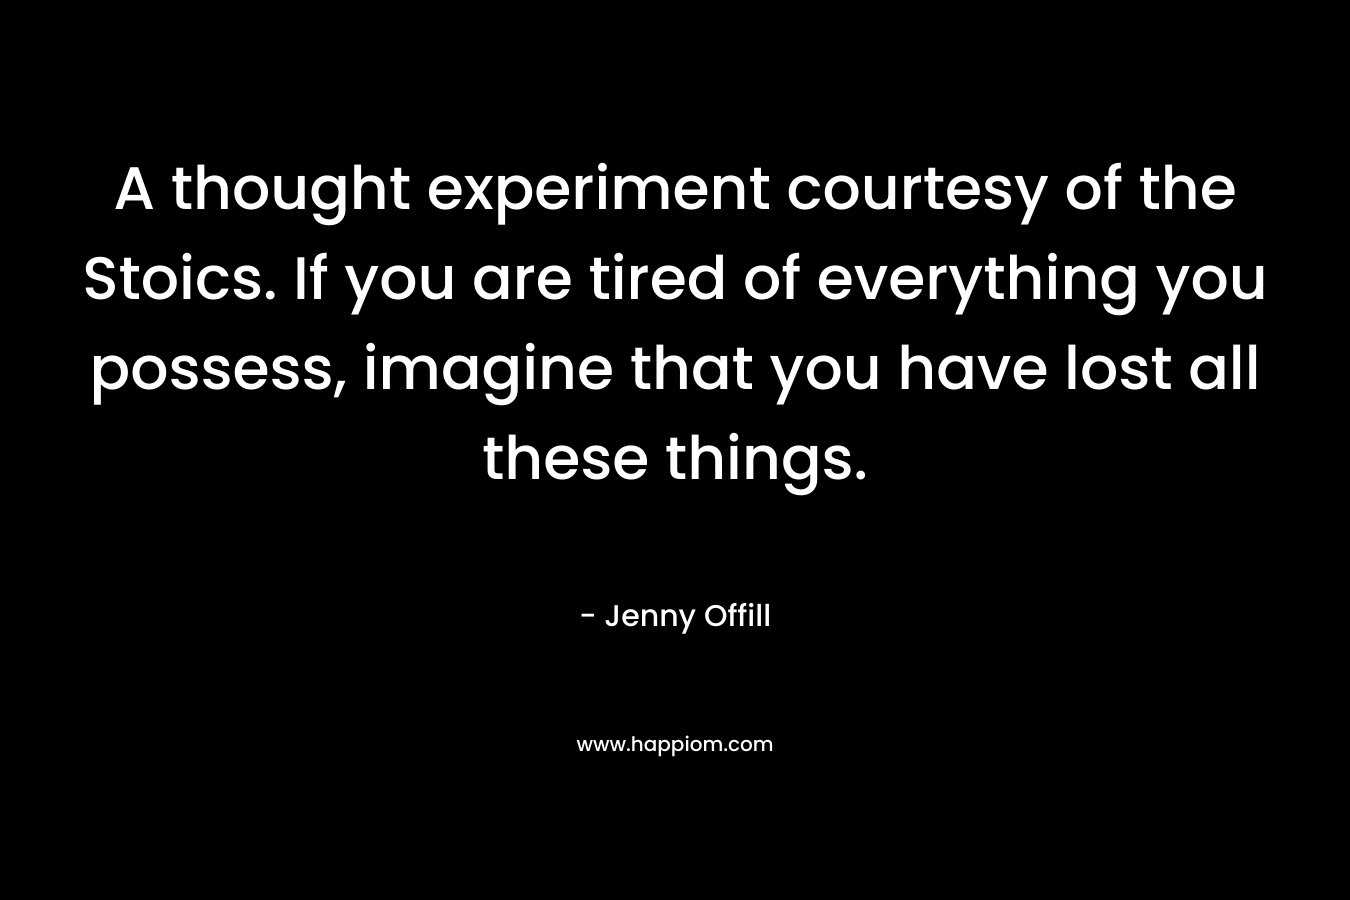 A thought experiment courtesy of the Stoics. If you are tired of everything you possess, imagine that you have lost all these things. – Jenny Offill